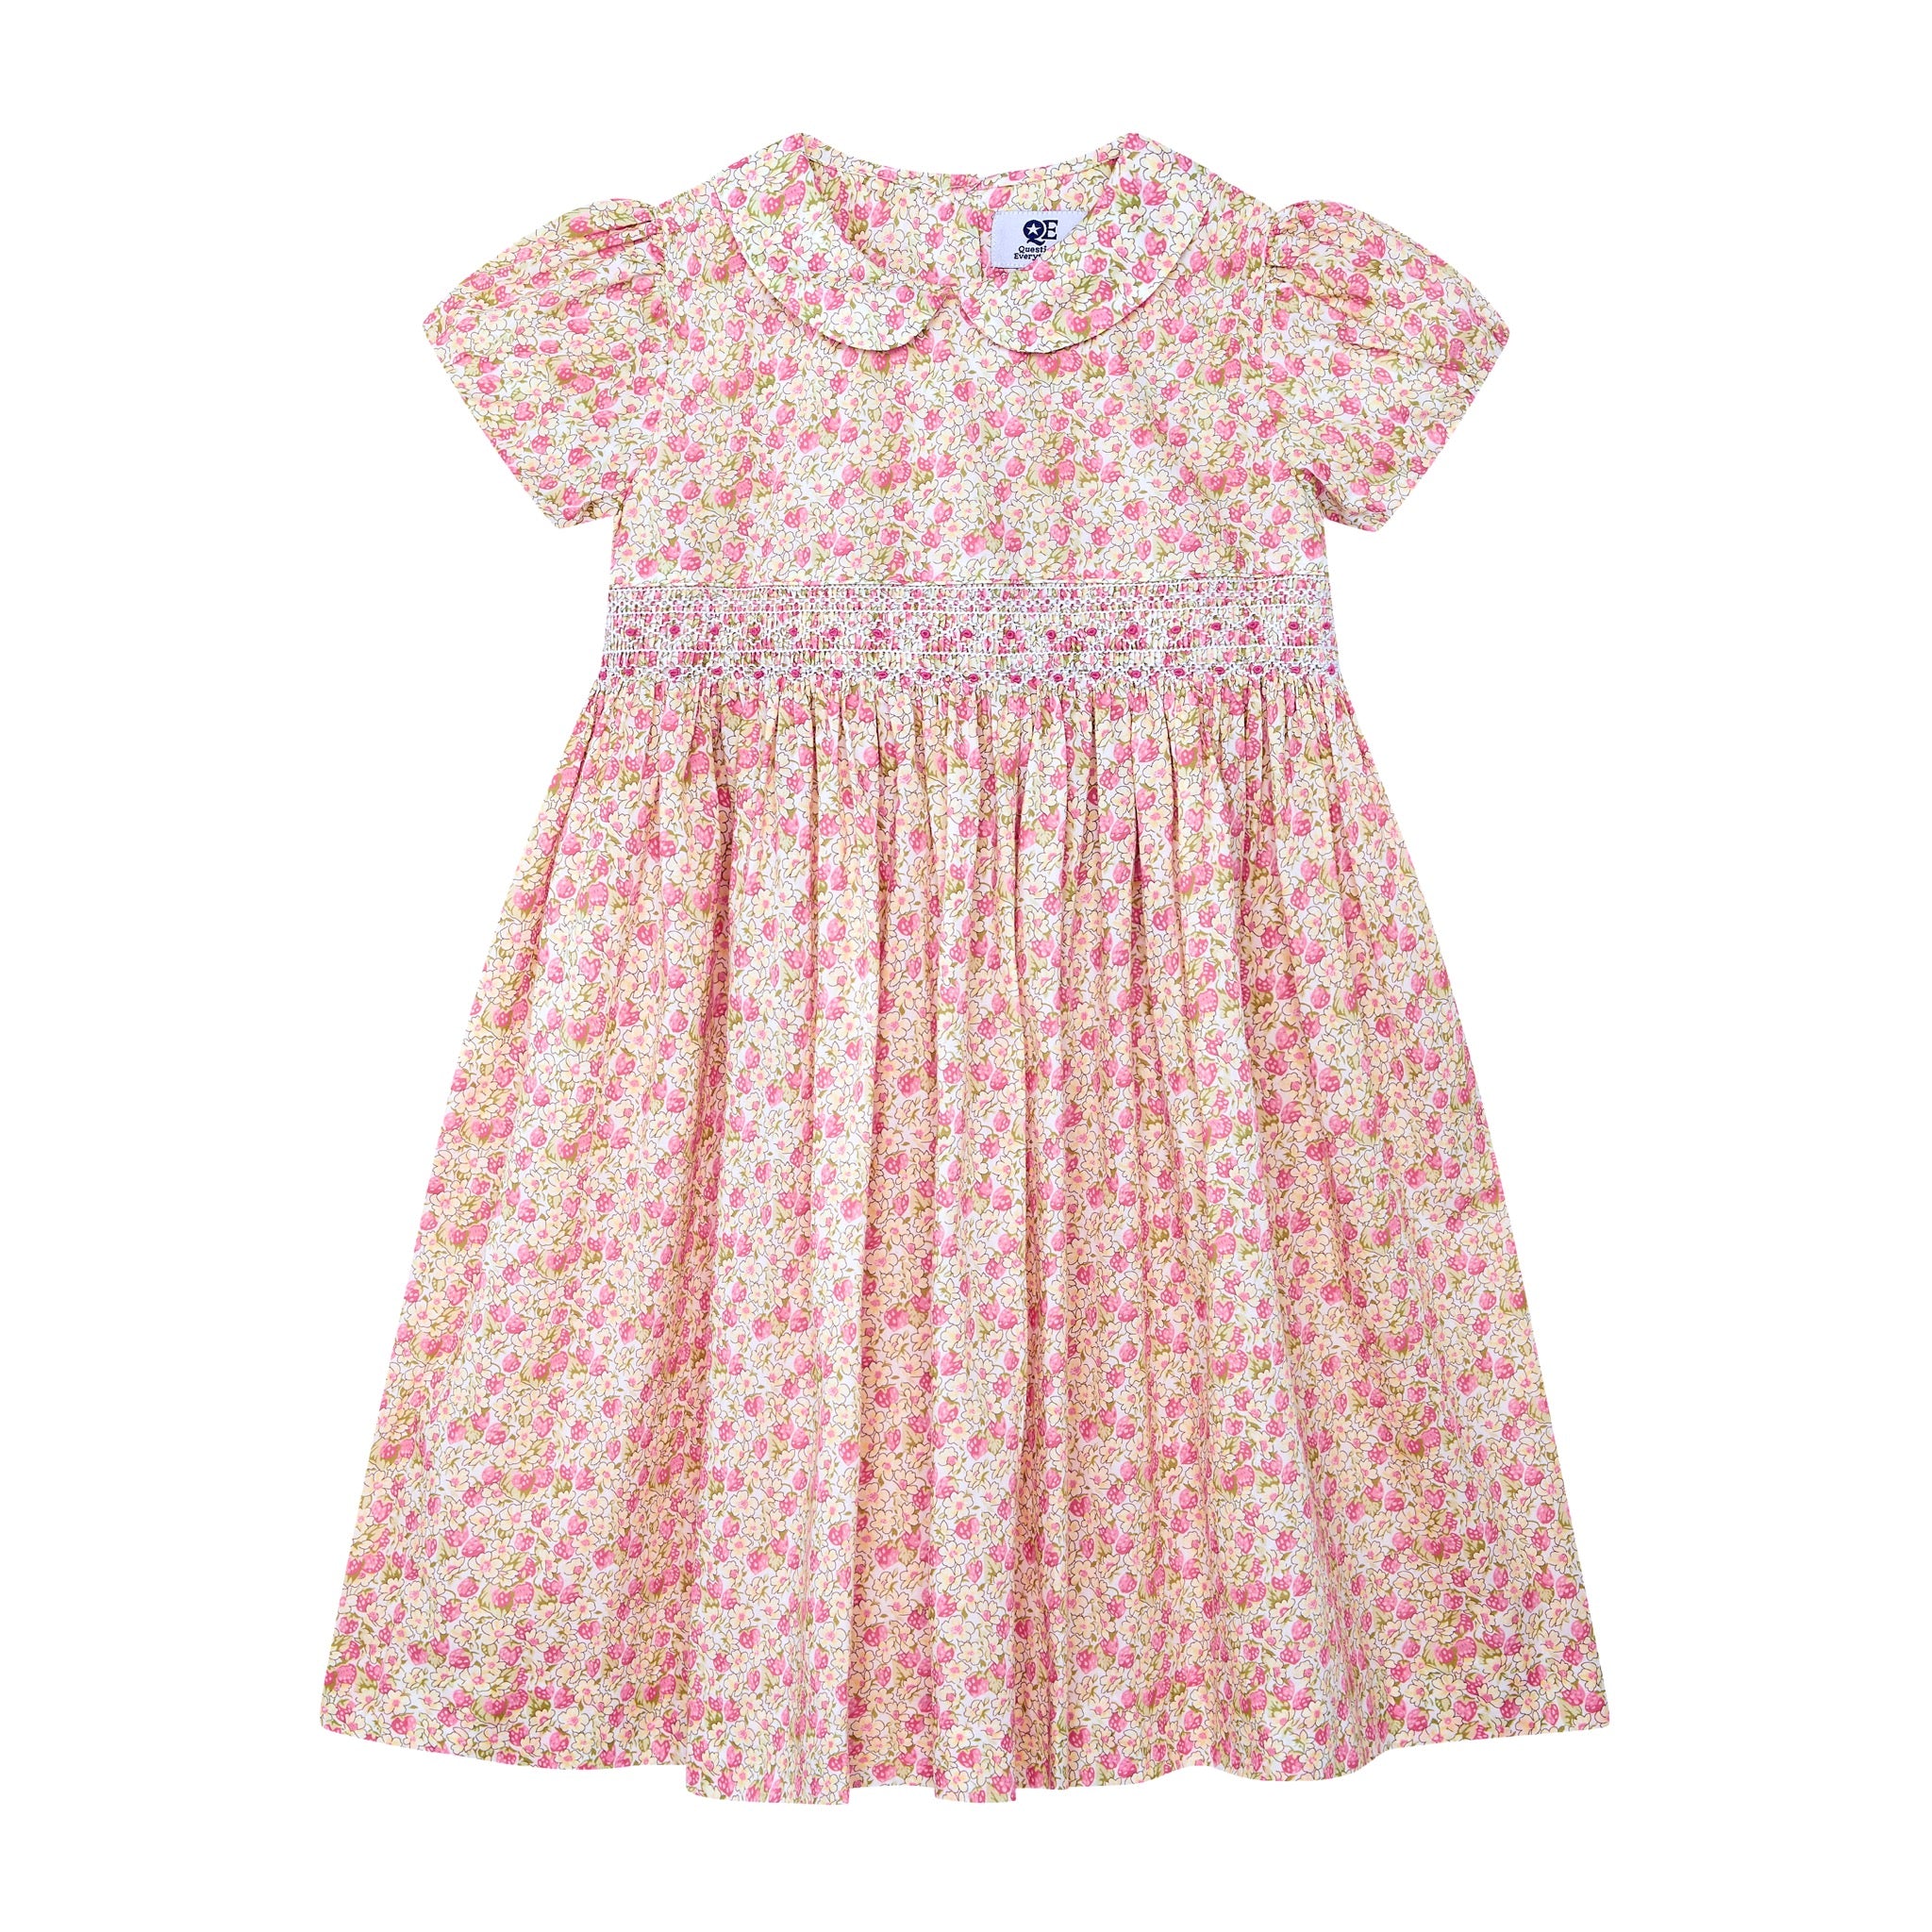 pastel strawberry dress, hand-smocked, front